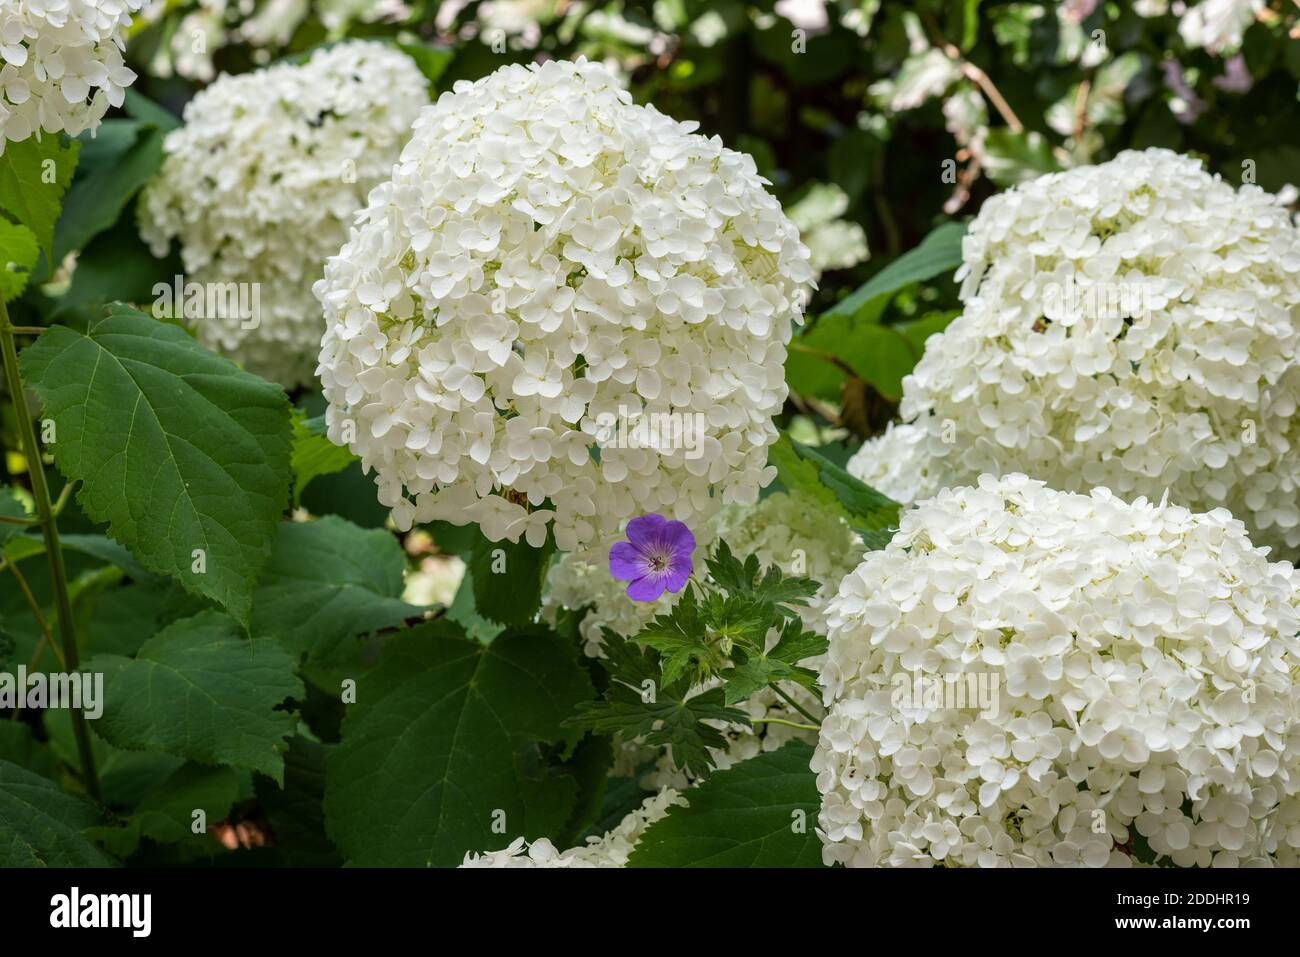 flowering white lush round hydrangea blossoms with a violet cranesbill on natural blurred background Stock Photo